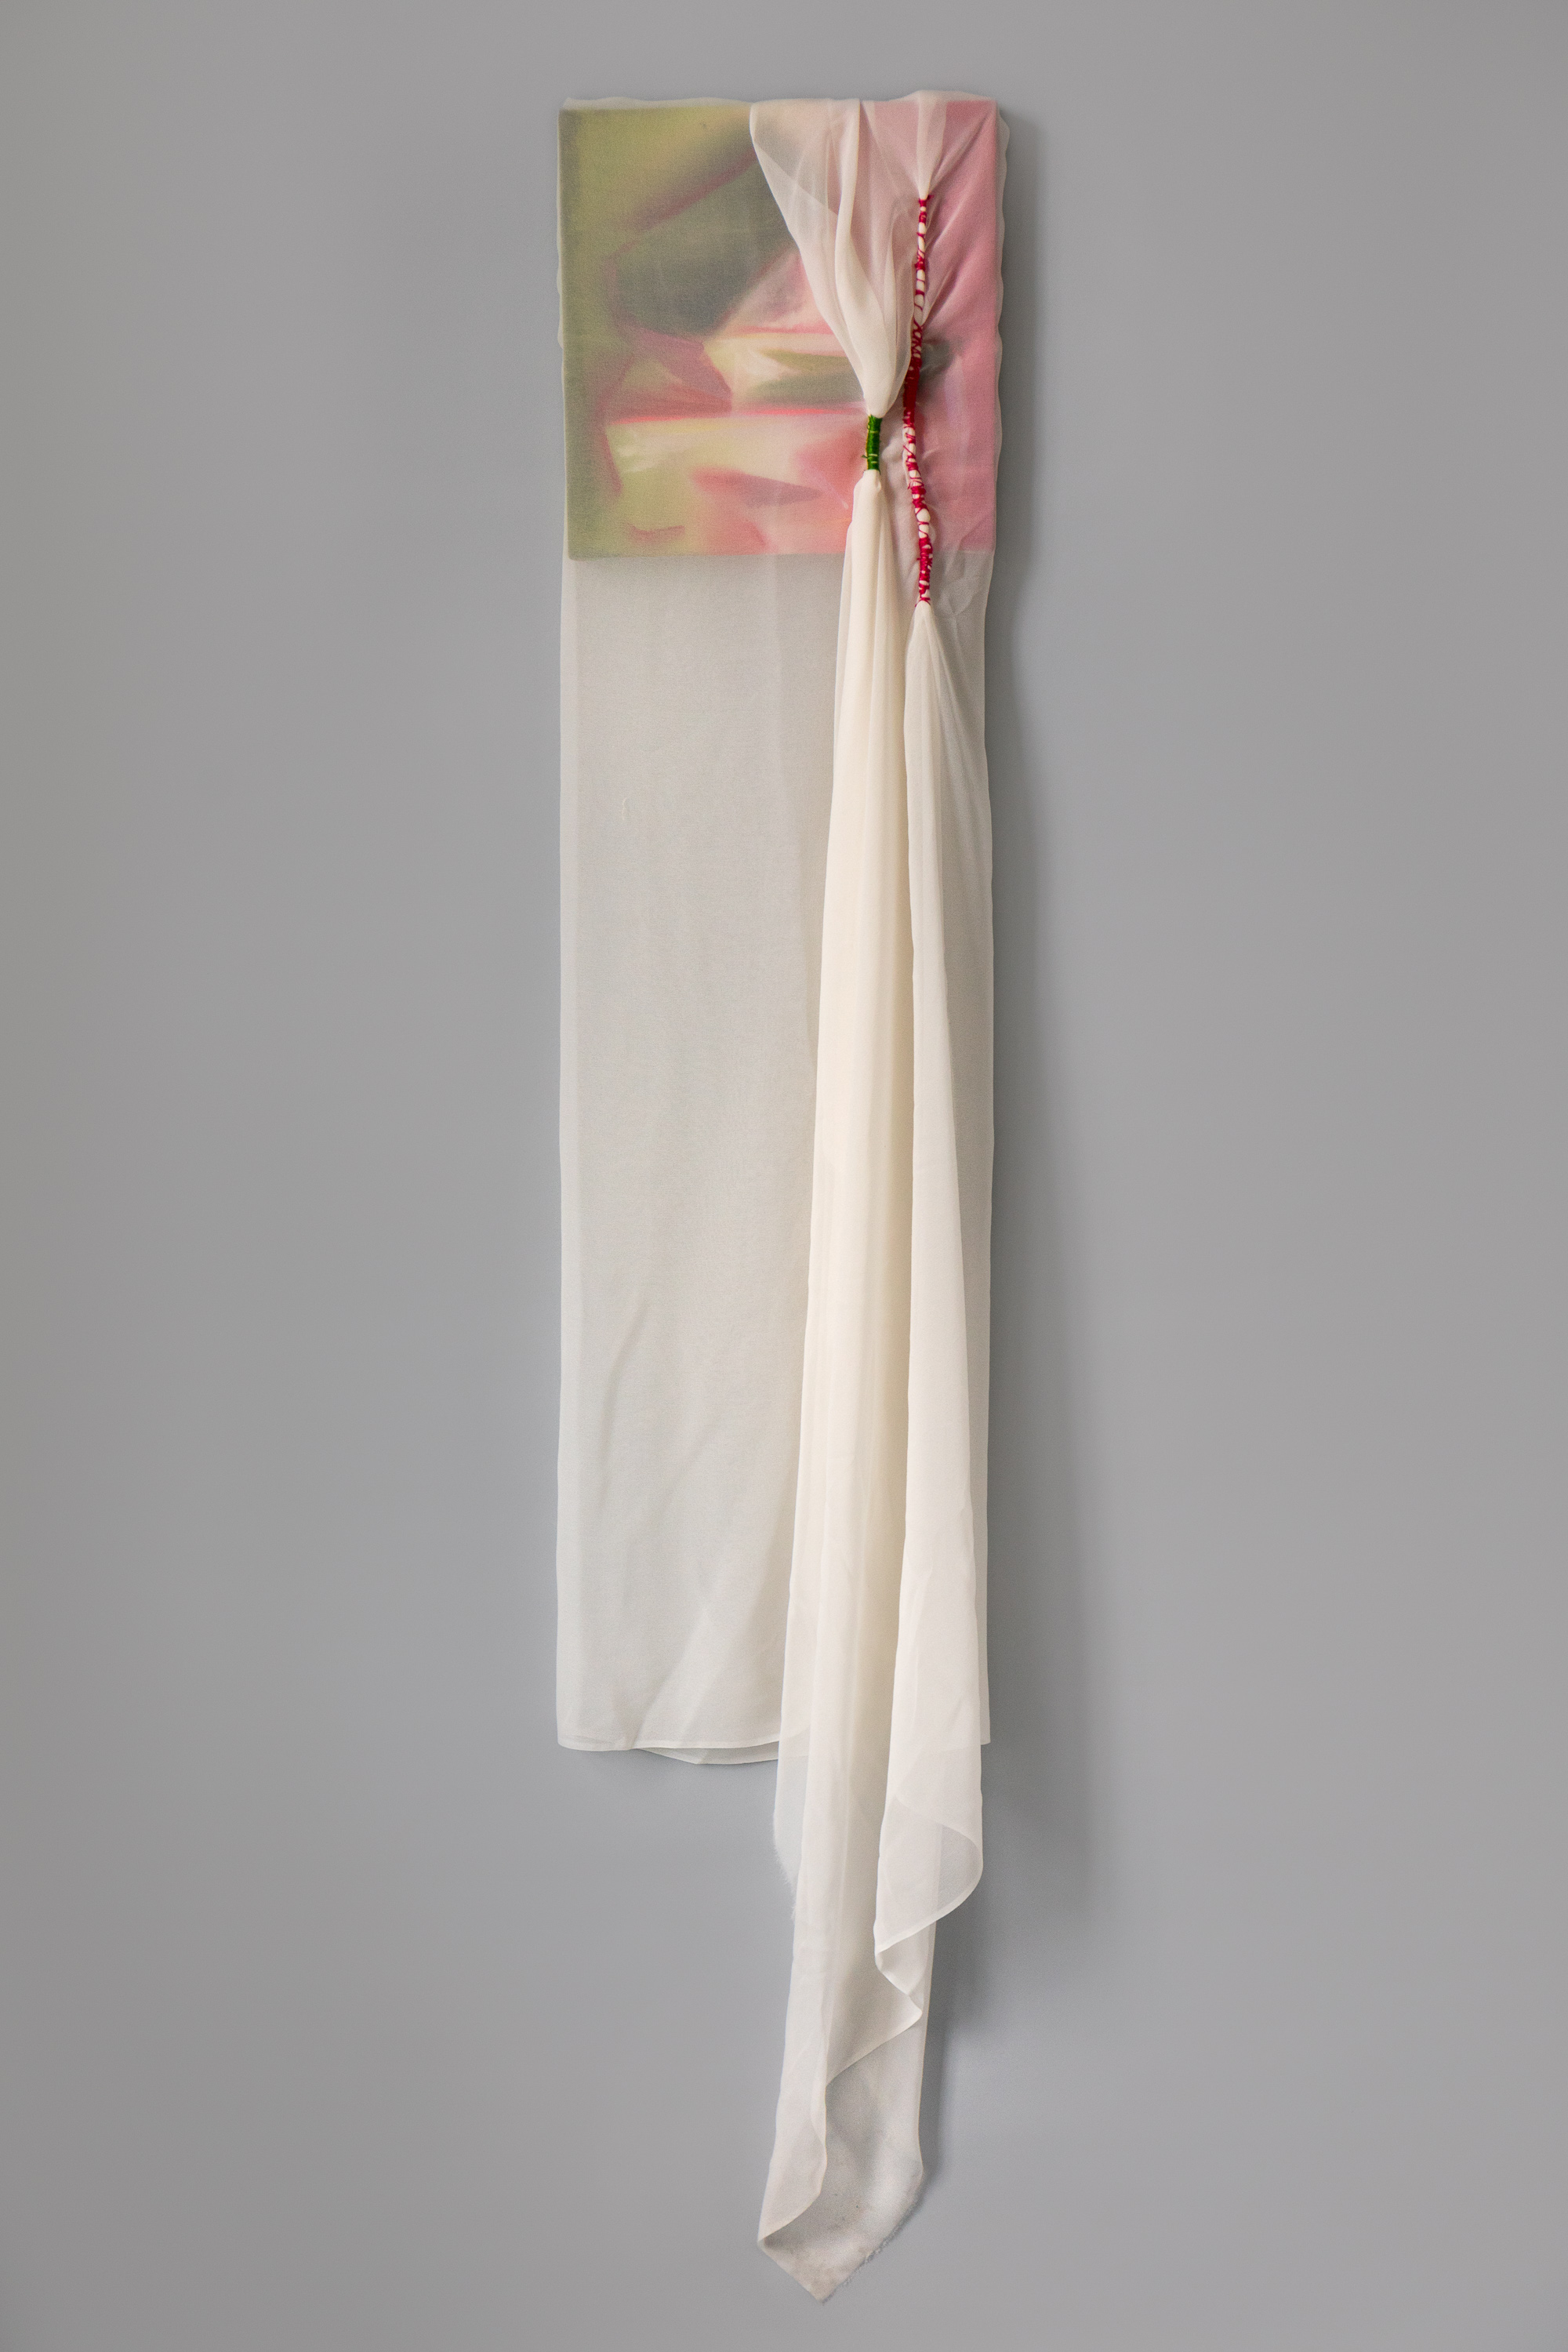 A canvas and hanging fabric by Eugene Sohn